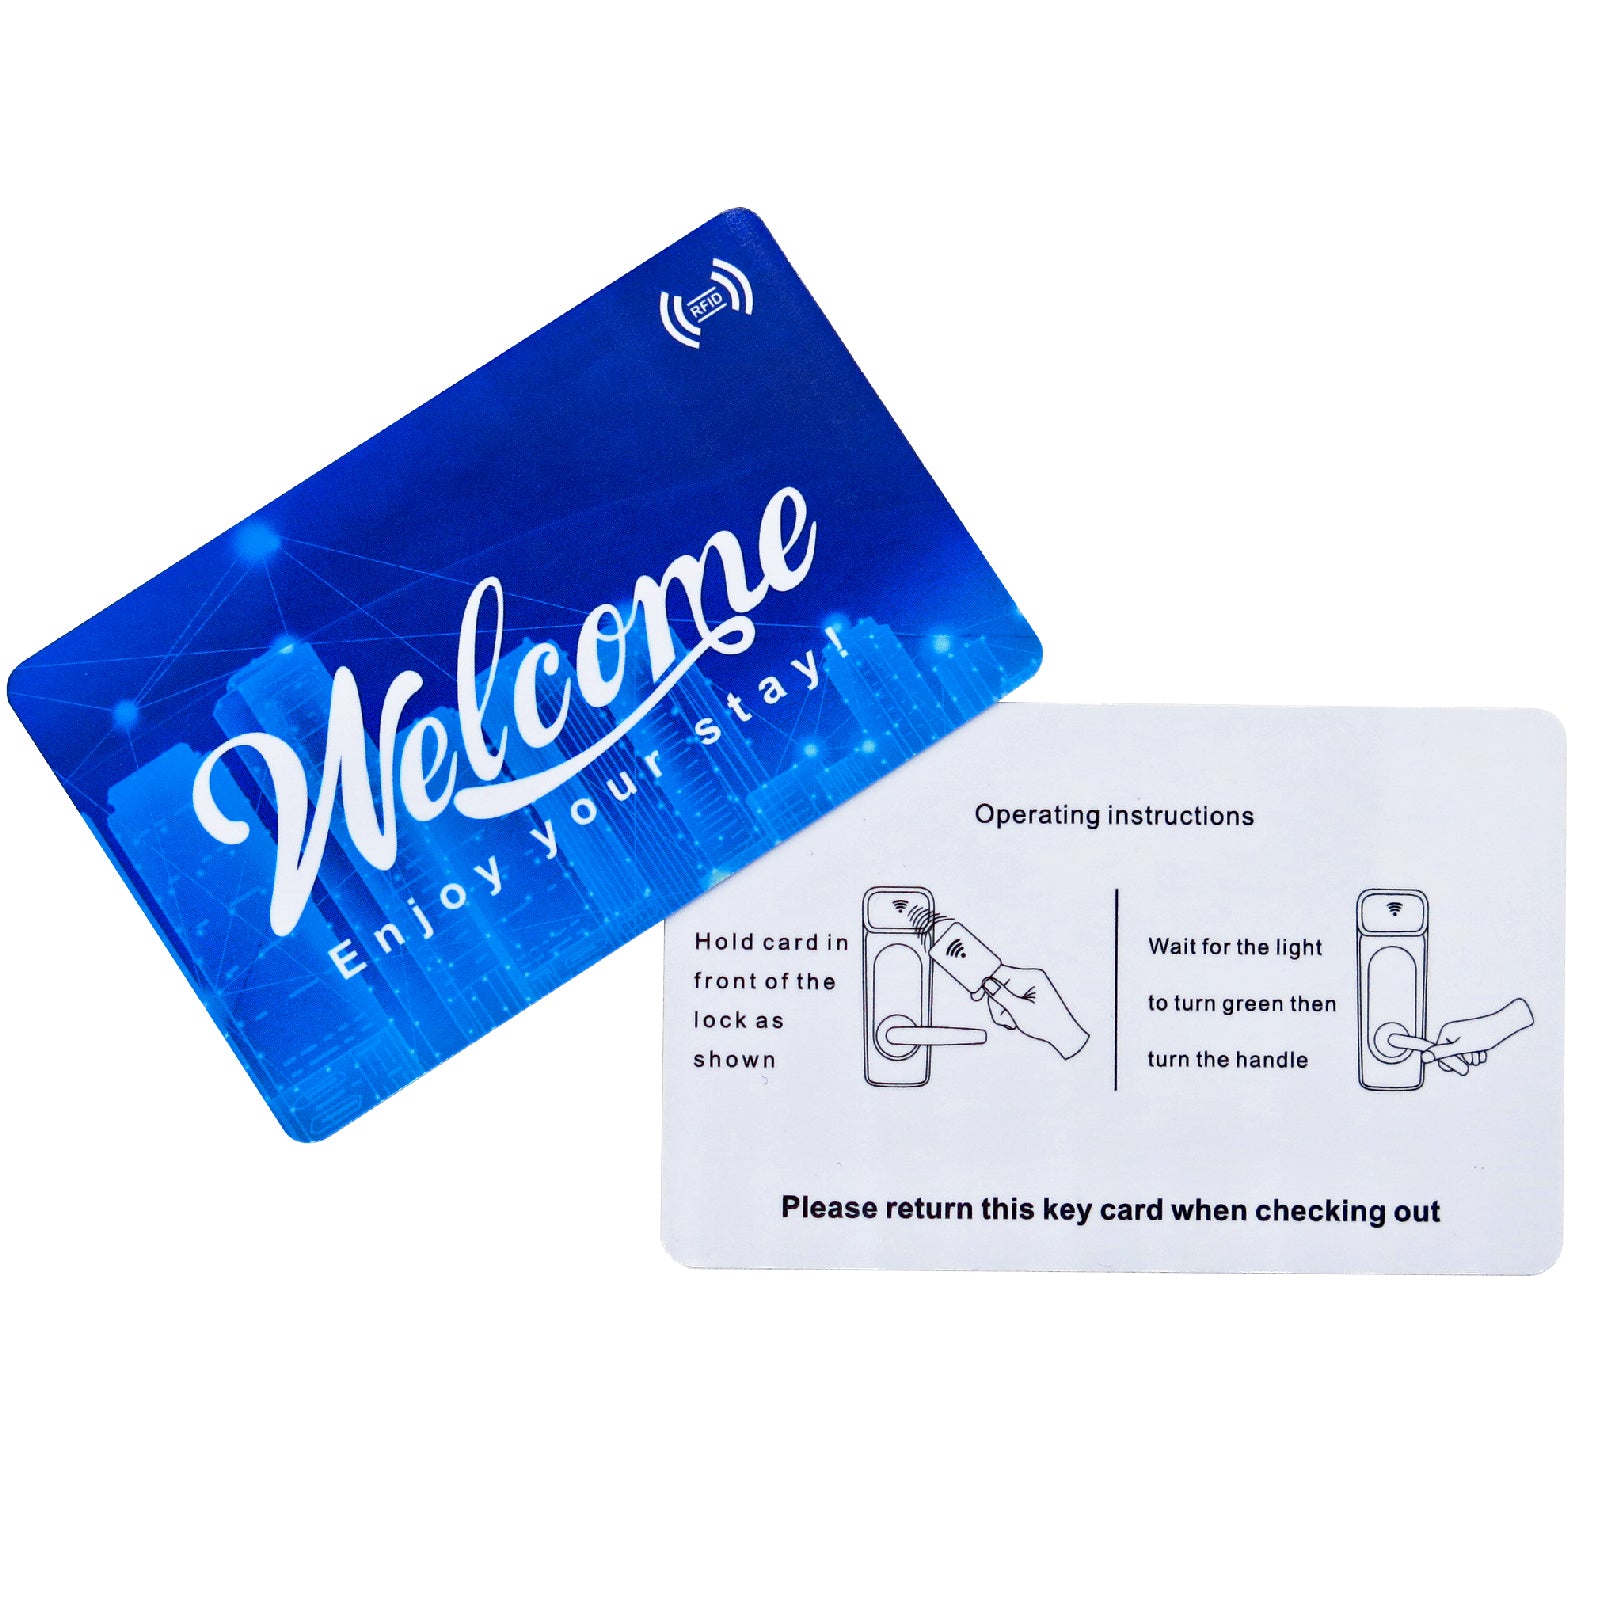 Gialer RFID Hotel Key Card, RFID Motel Key Card with Envelopes Sleeve Welcome Enjoy Your Stay